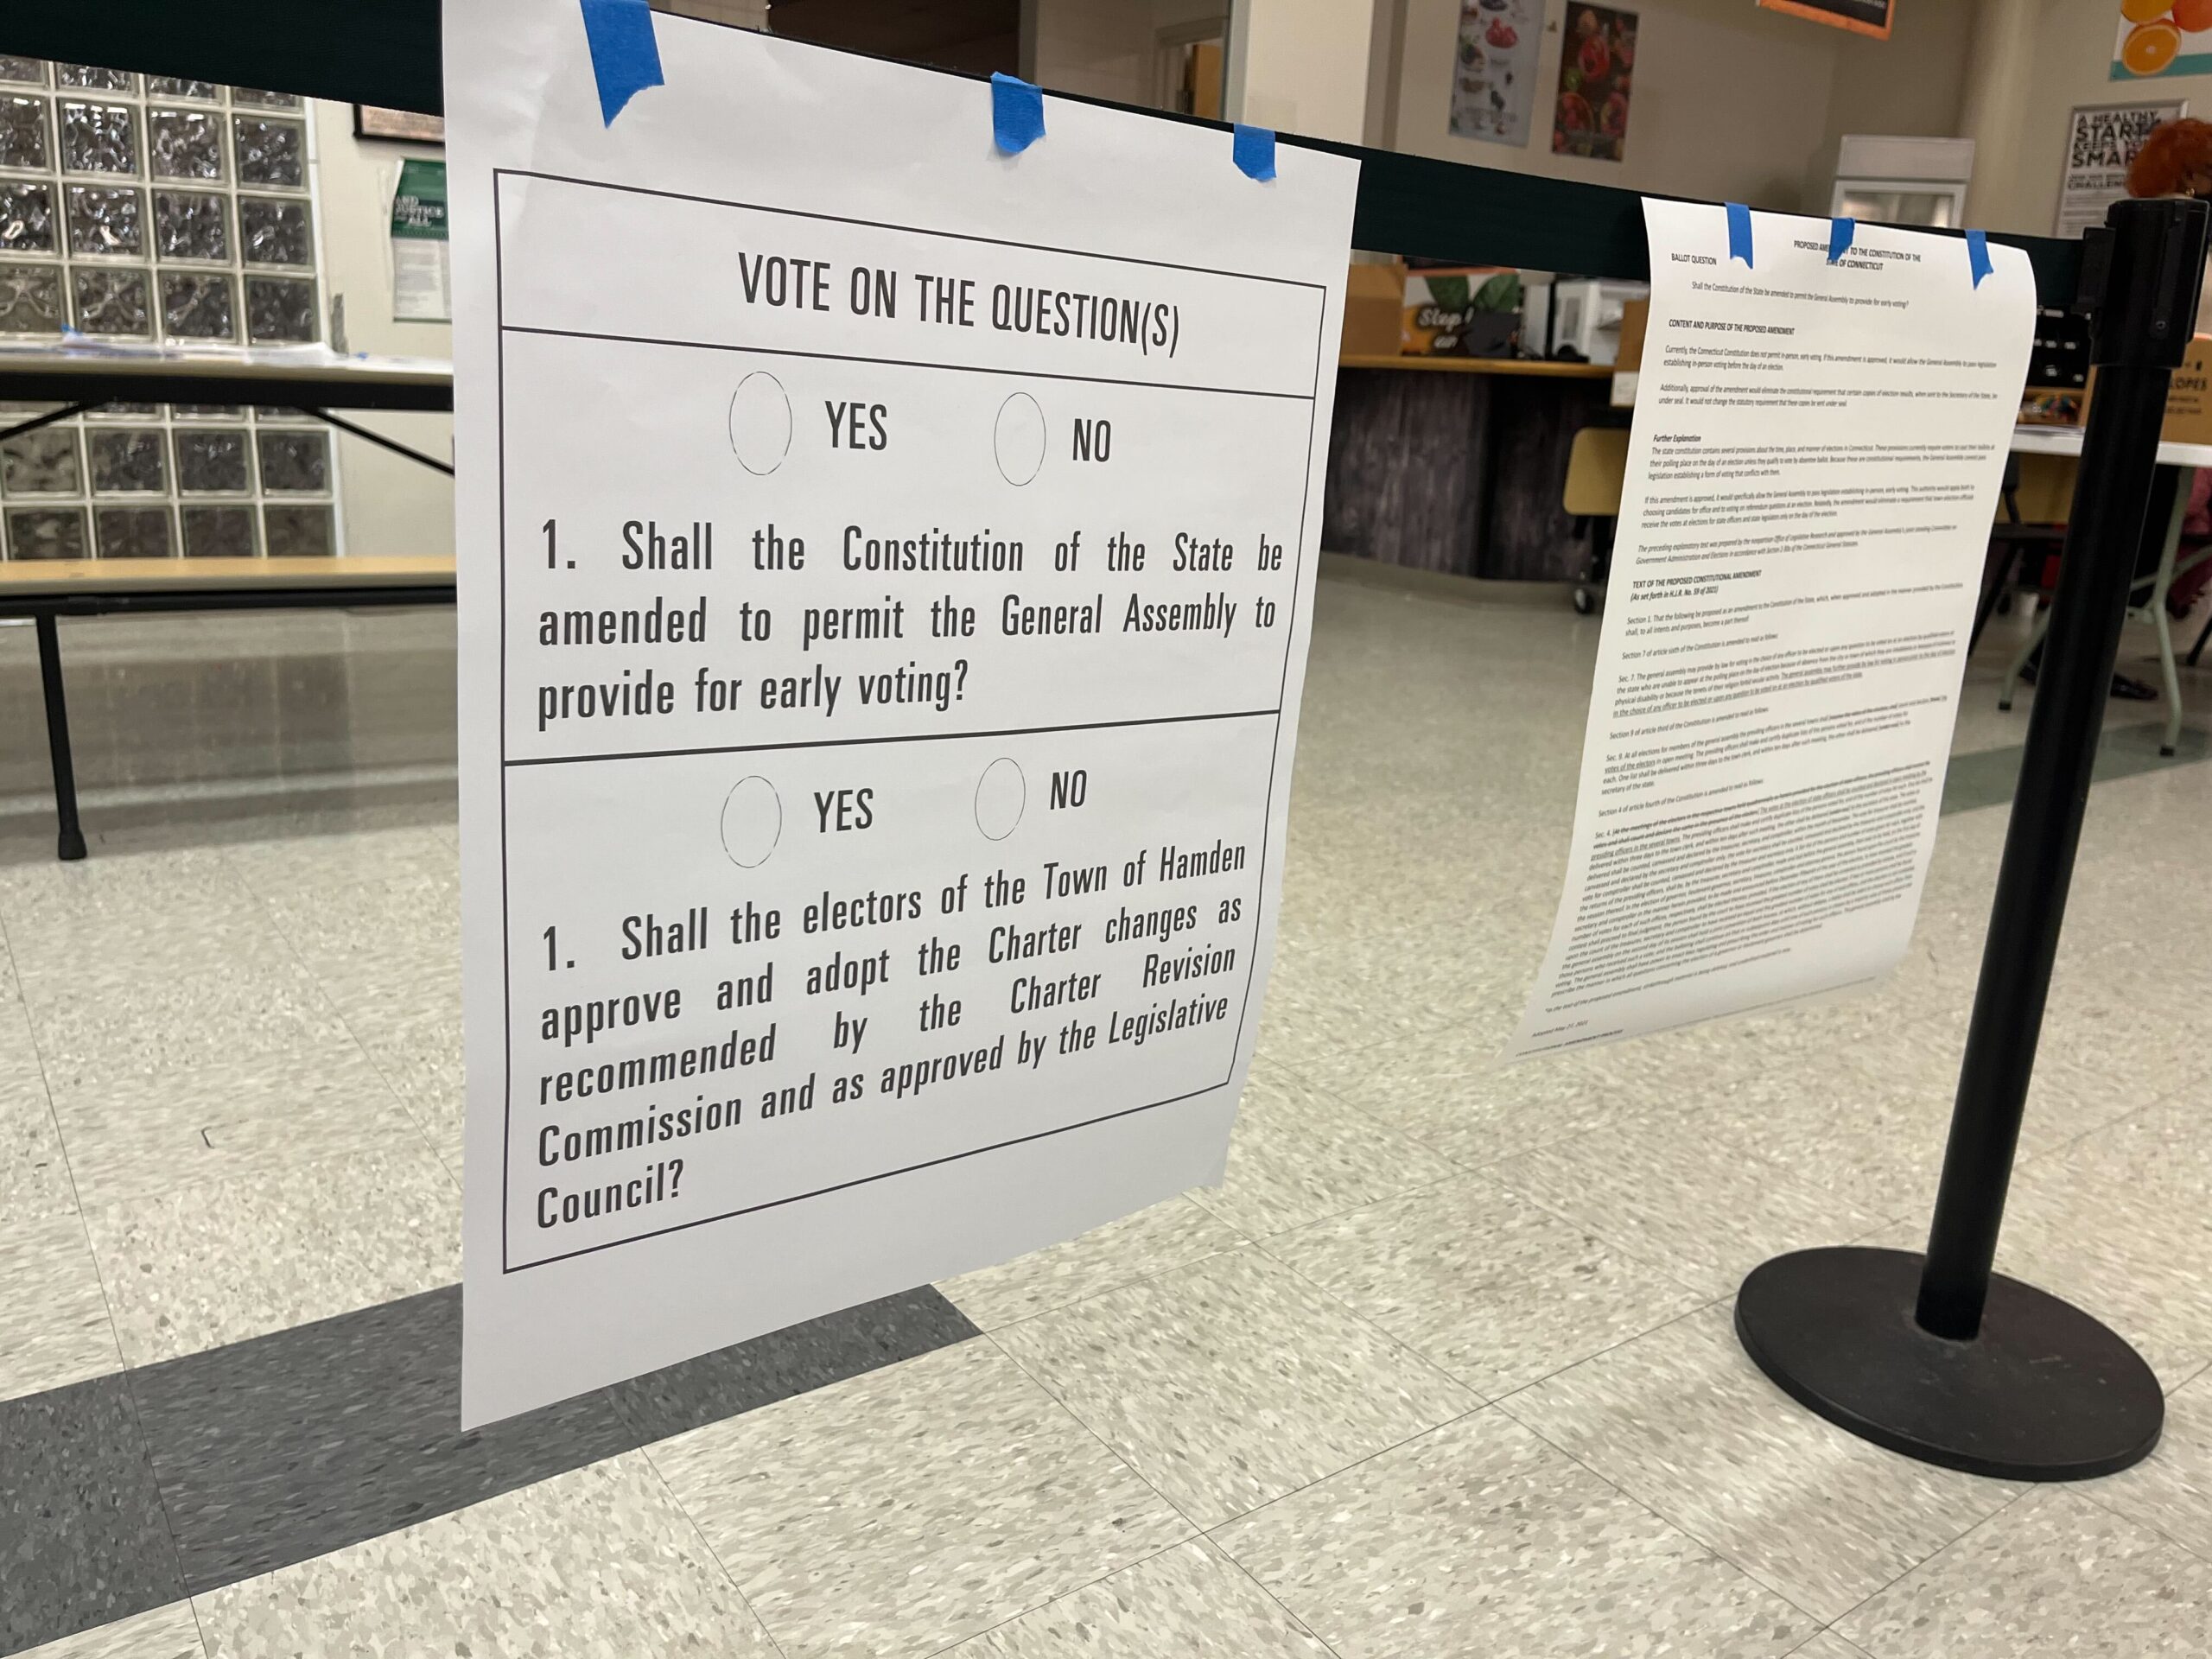 Posted questions included on the 2022 midterm election ballot. "Vote on the question(s): 1. Shall the Constitution of the State be amended to permit the General Assembly to provide for early voting? 1. Shall the electors of the Town Hamden approve and adopt the Charter changes as recommended by the Charter Revision Commission and as approved by the Legislative Council?"